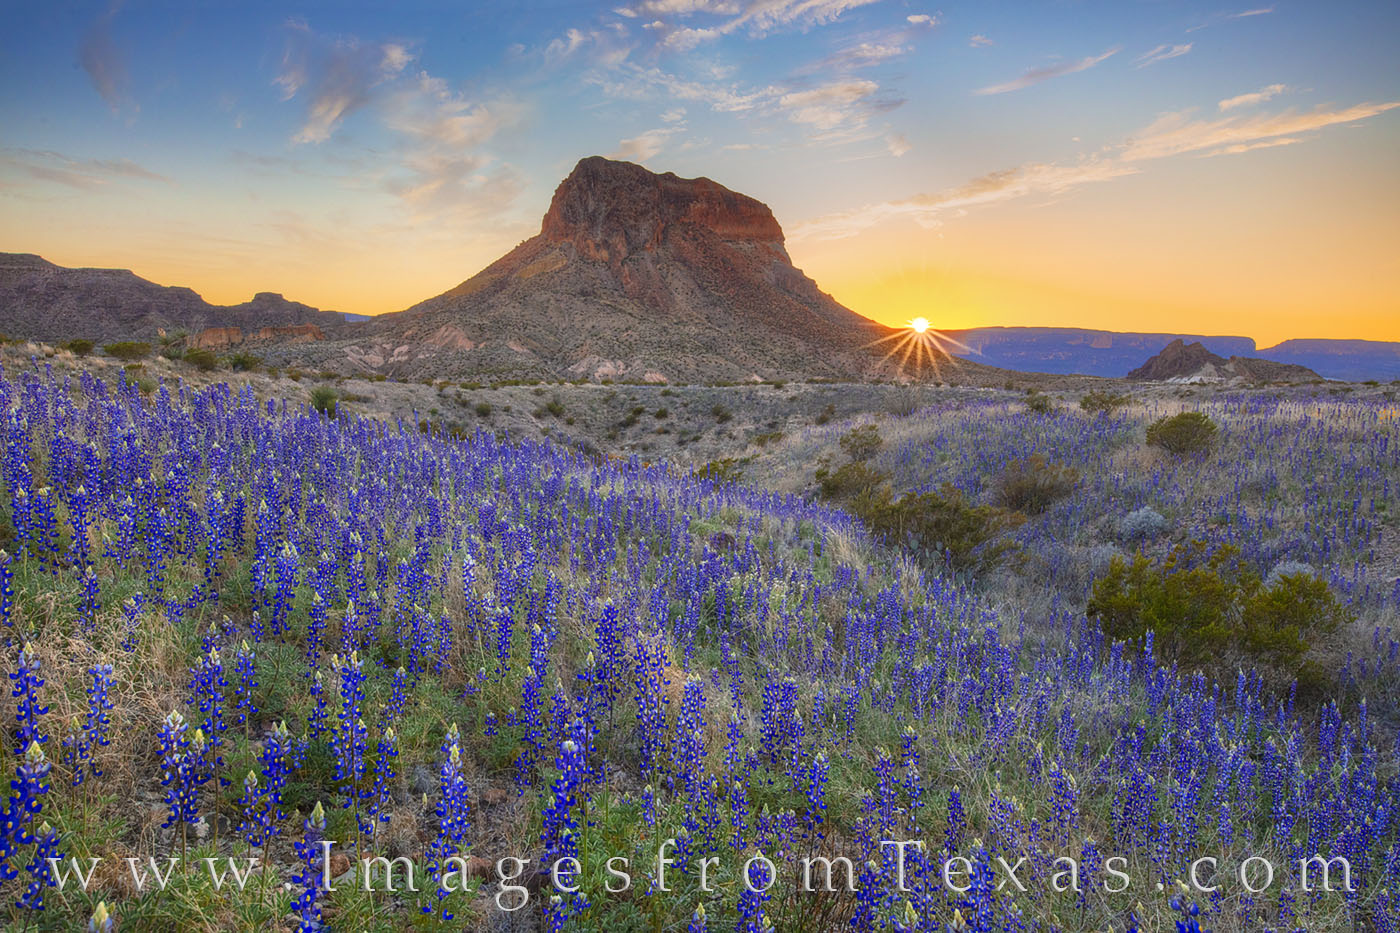 On a warm February evening in Big Bend National Park, a wash of bluebonnets sits in the shadow of Cerro Castellan. In the distance...